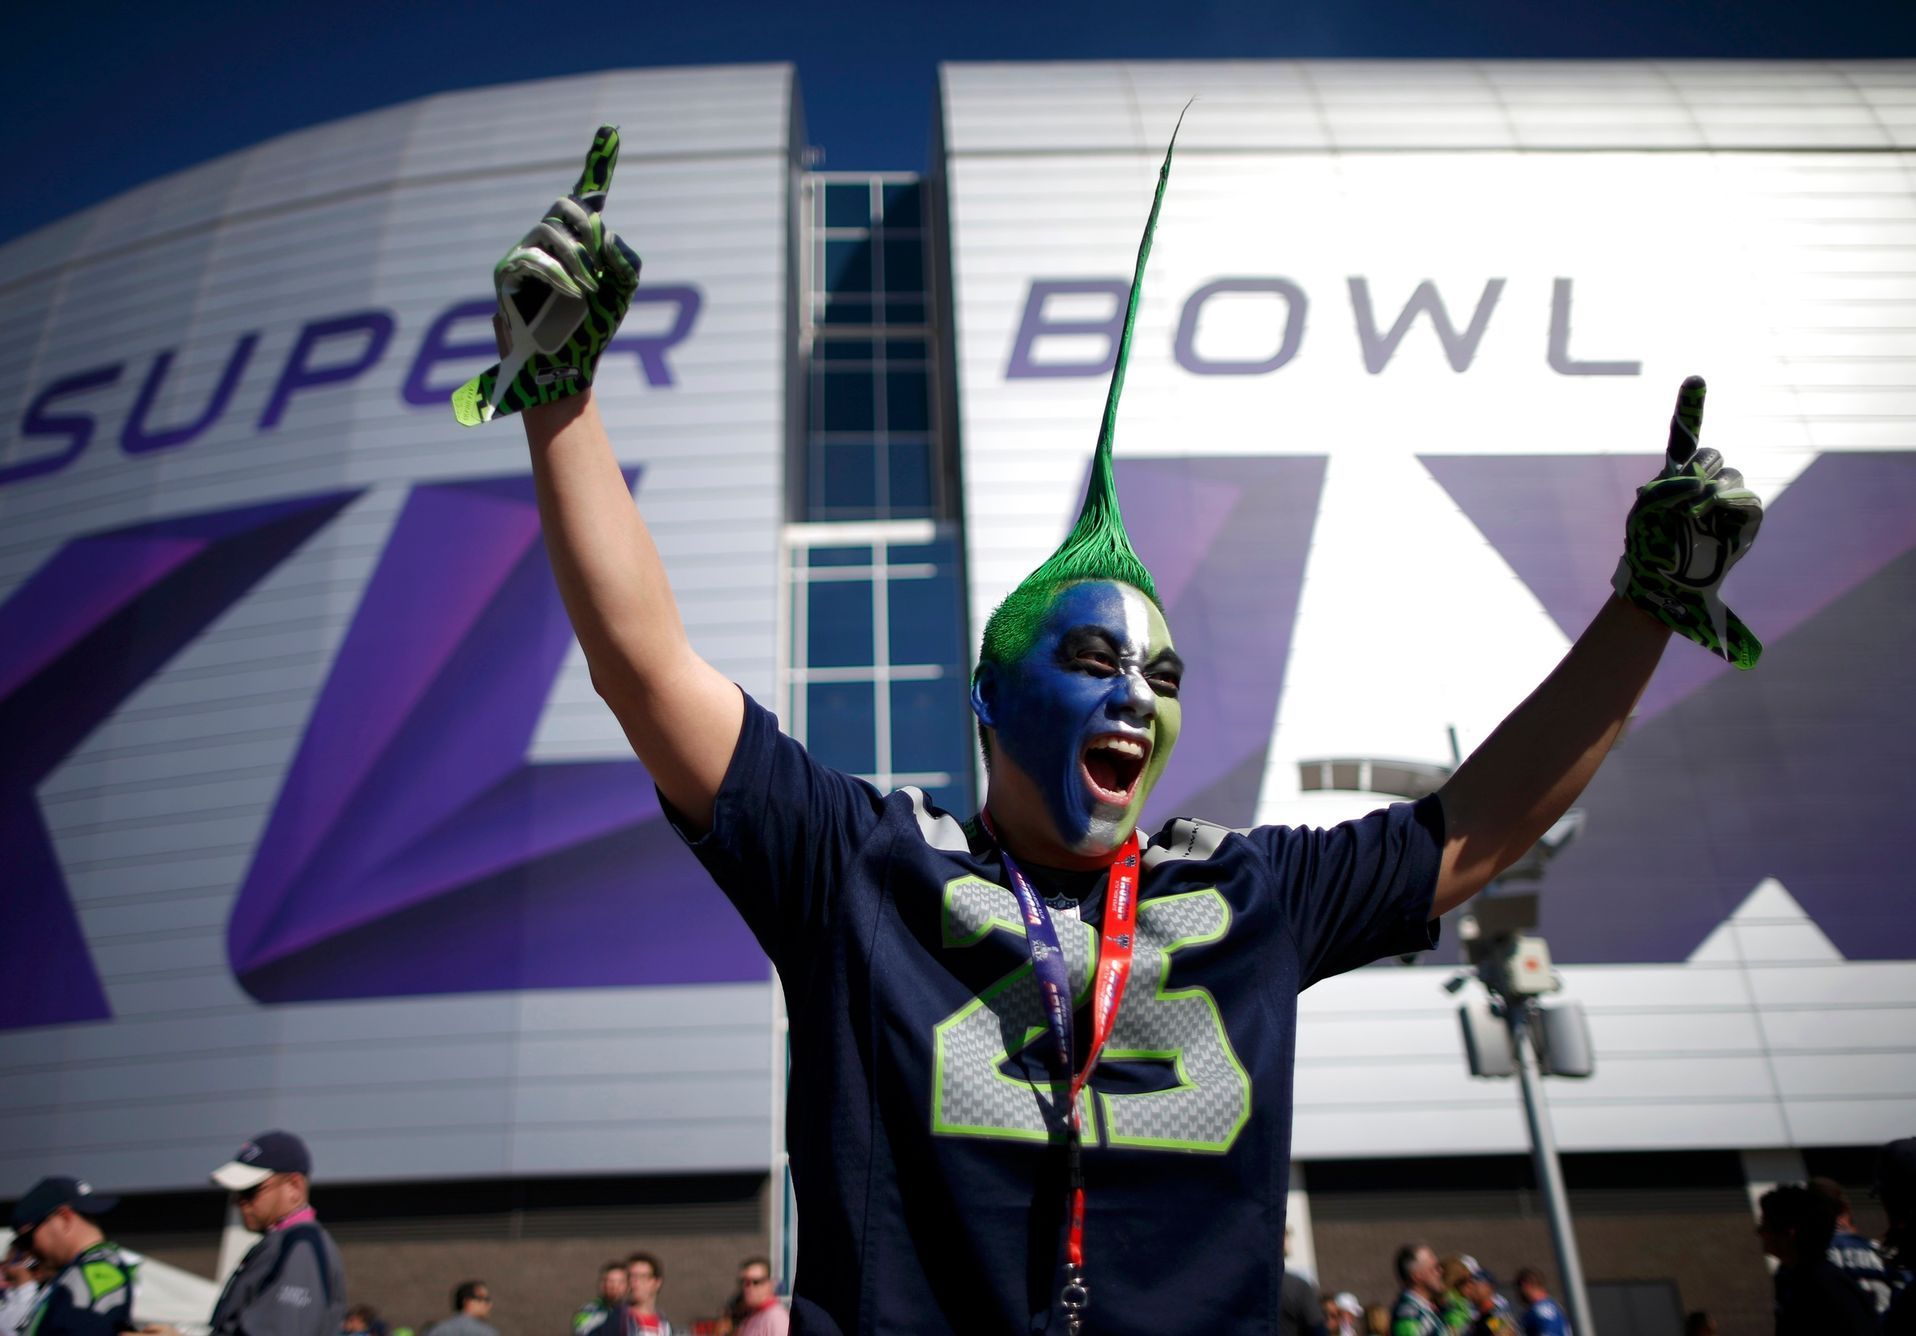 A Seattle Seahawks fan celebrates while awaiting the start of the NFL Super Bowl XLIX football game against the New England Patriots in Glendale